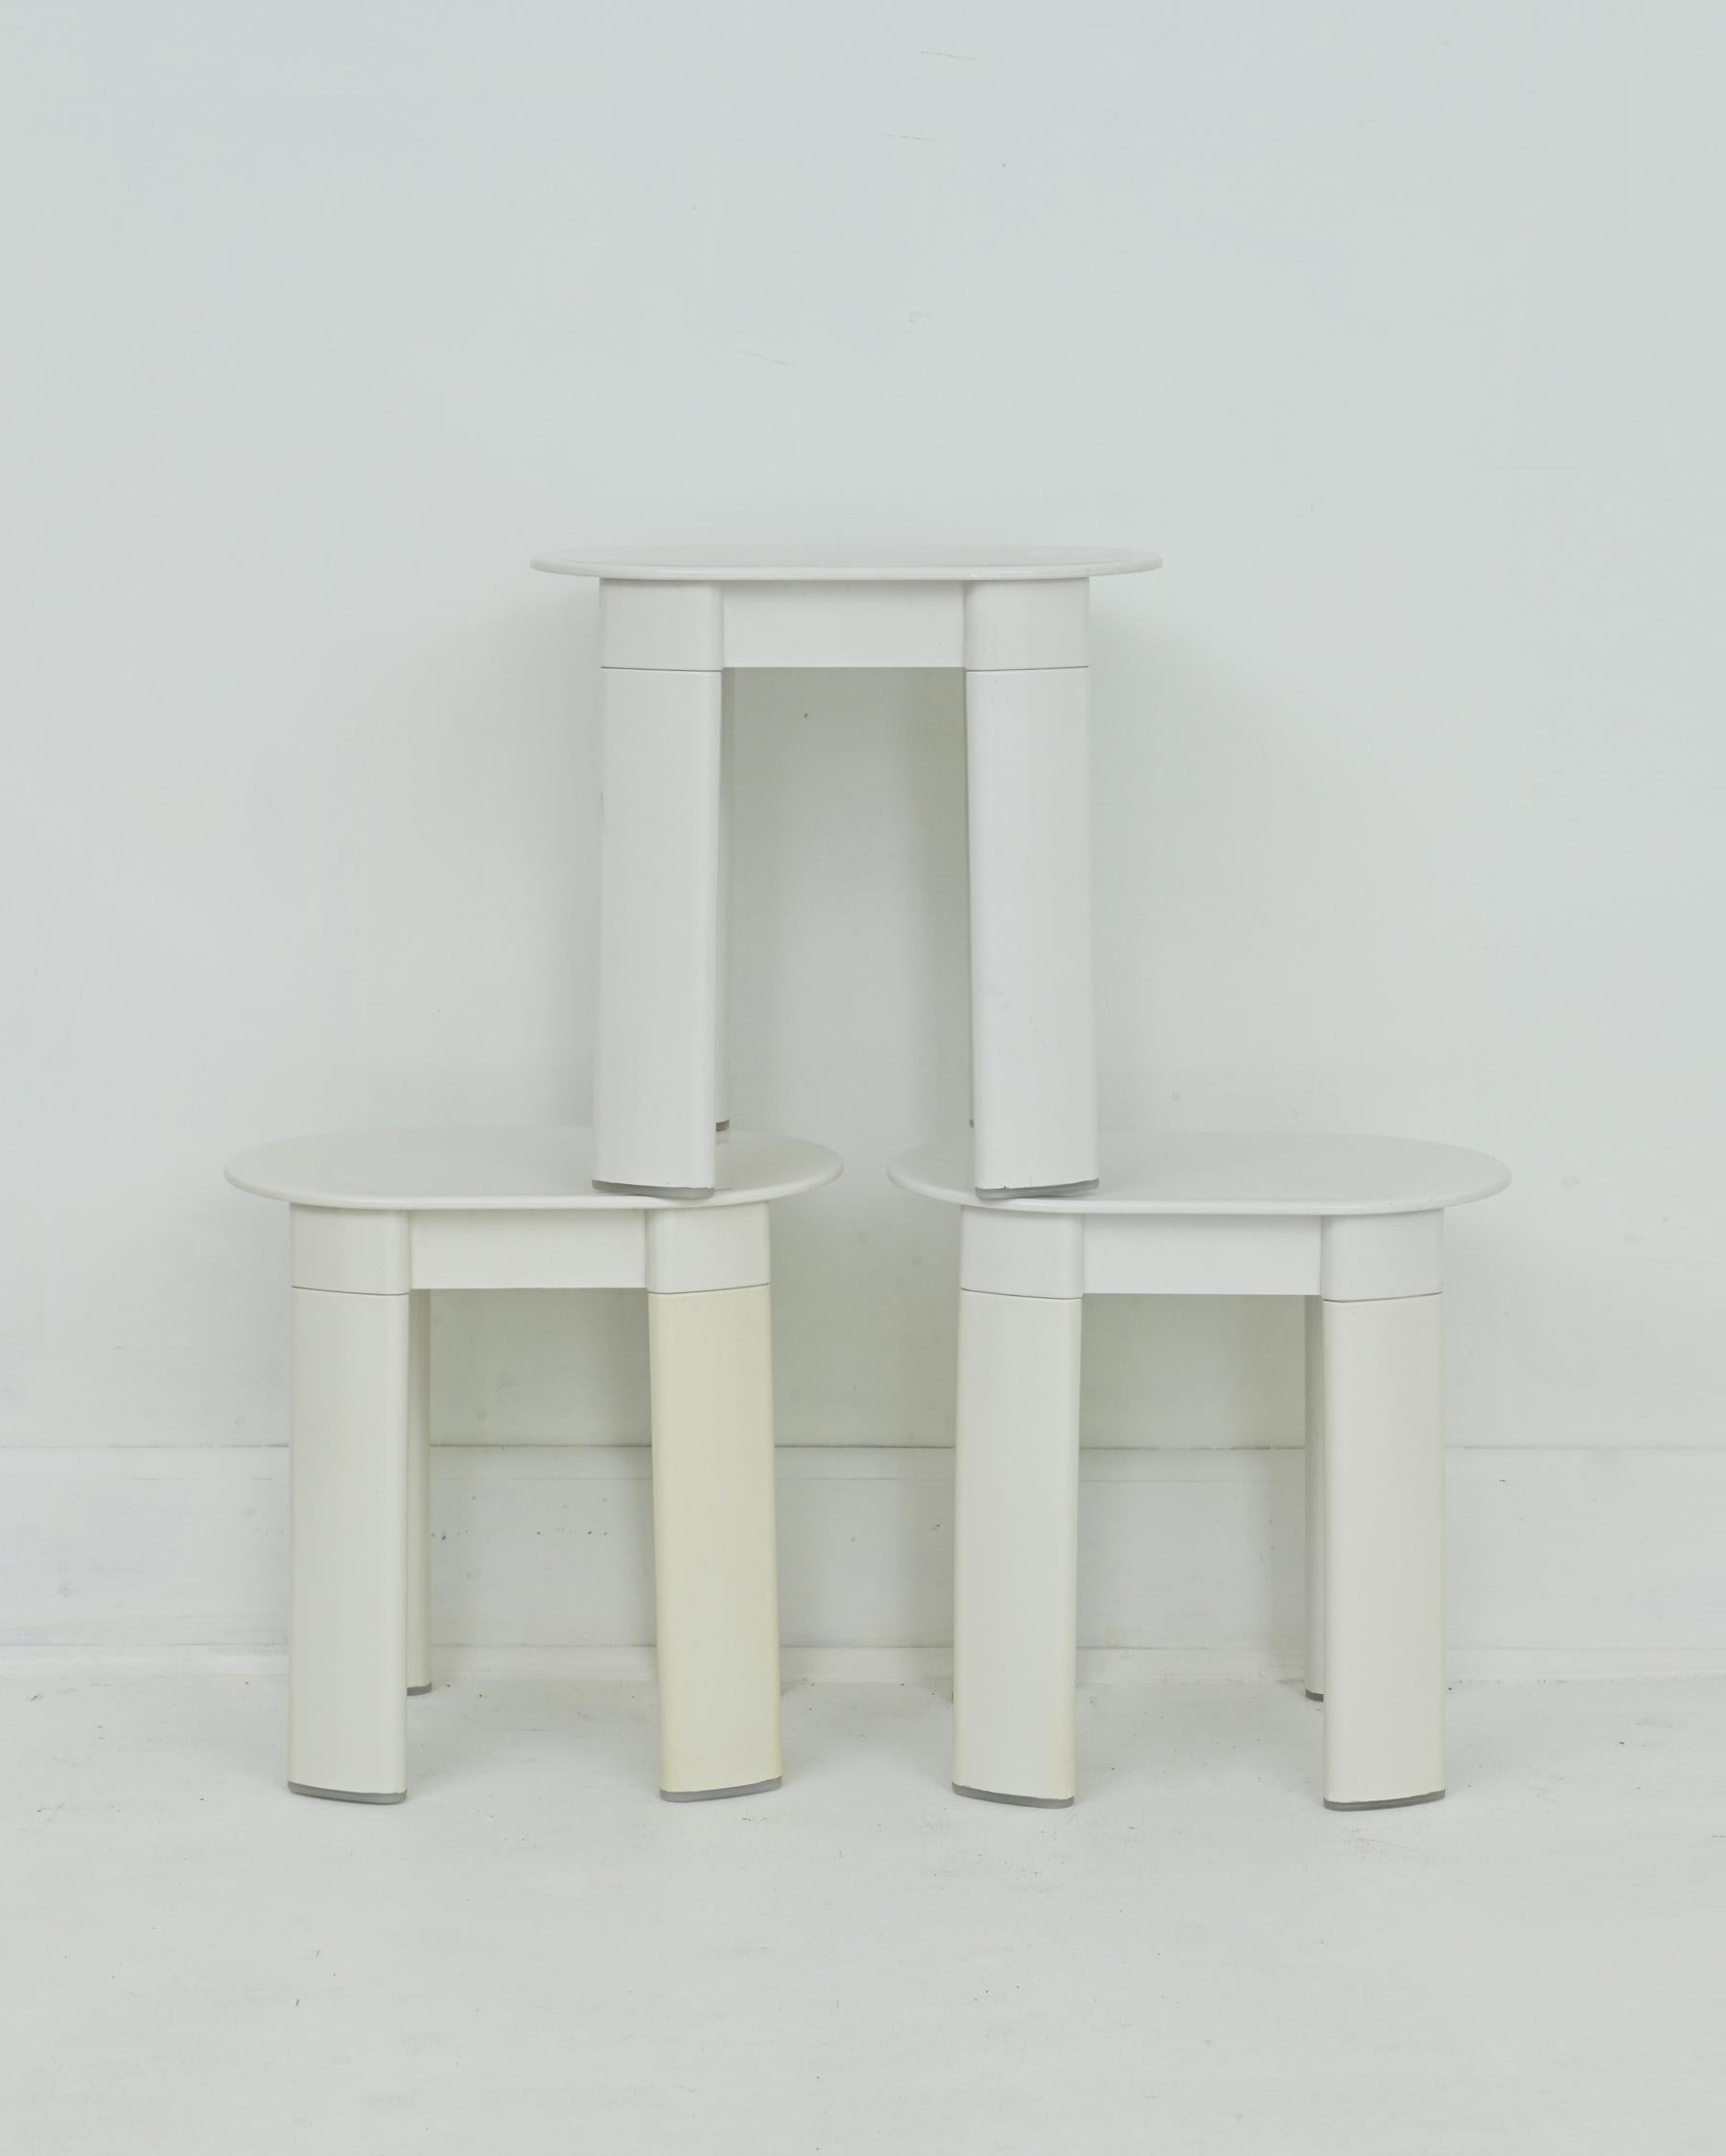 16” high x 16.5” wide x 10.5” deep 
Space Age 4-Legged Stool or Side Table by Olaf von Bohr for GEDY. Made in Italy. Four available and sold separately. Each have light wear consistent with age and use. Legs can be removed for easier shipping. 

7